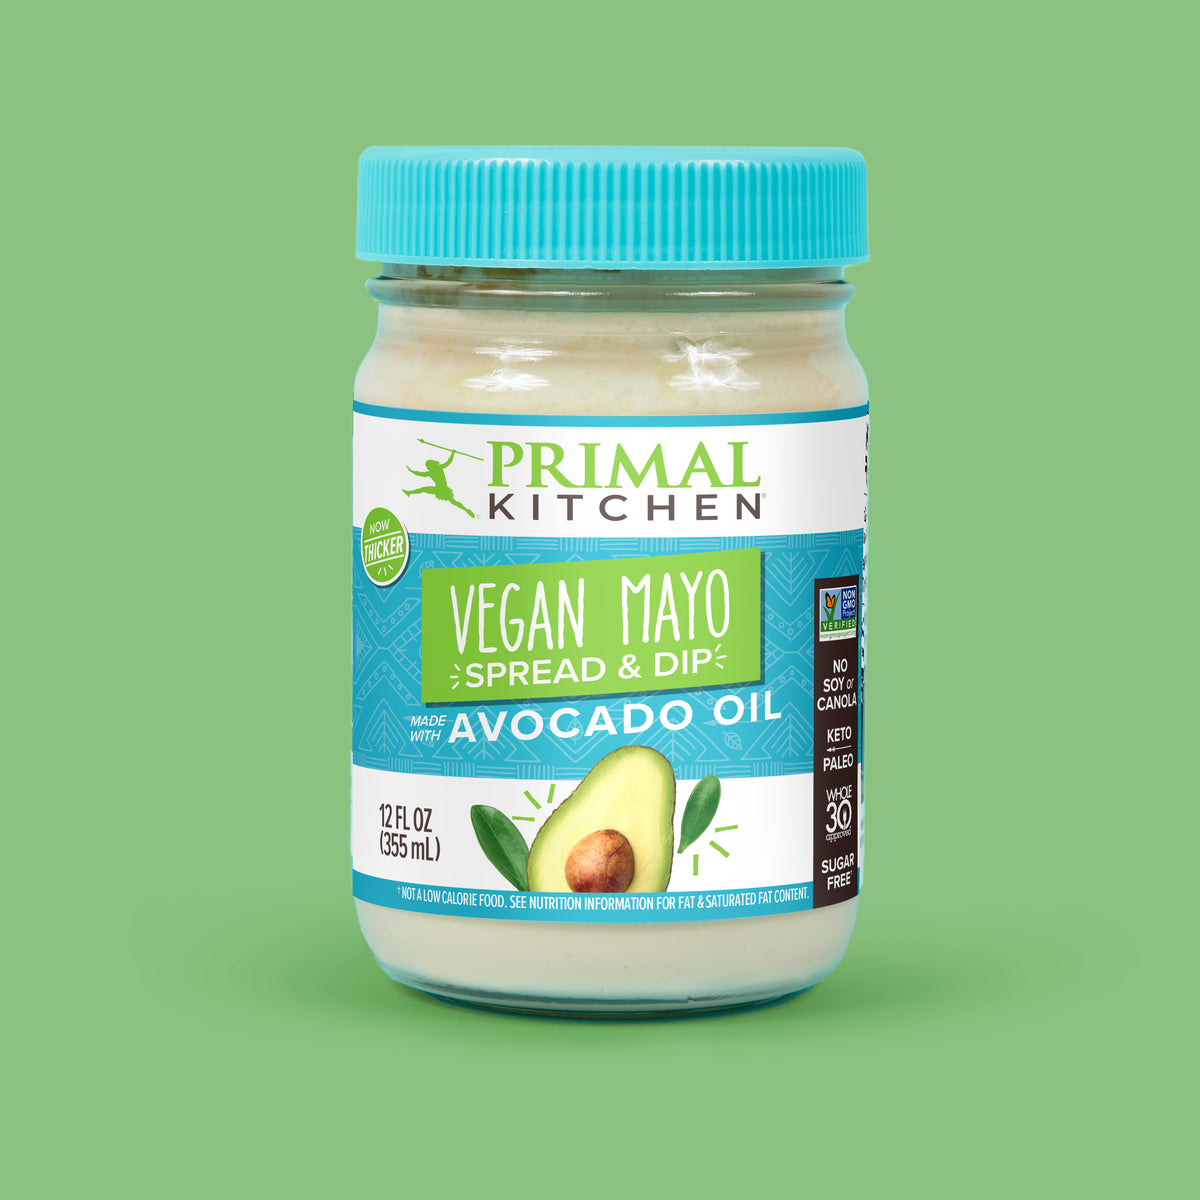 A 12 oz glass jar with a light blue lid of Primal Kitchen Vegan Mayo made with Avocado Oil against a green background.